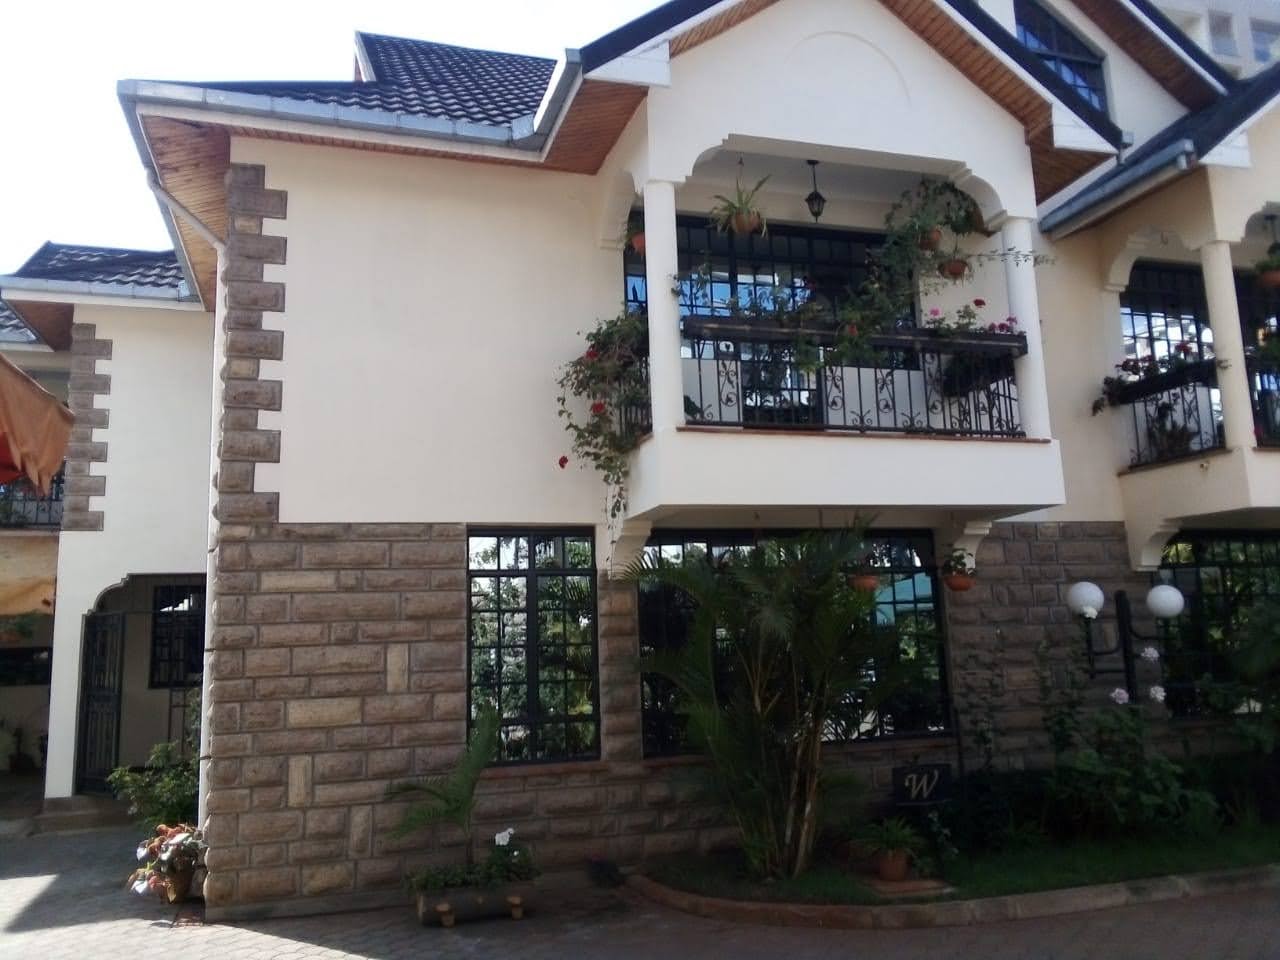 5 BEDROOM HOUSE IN LAVINGTON FOR SALE